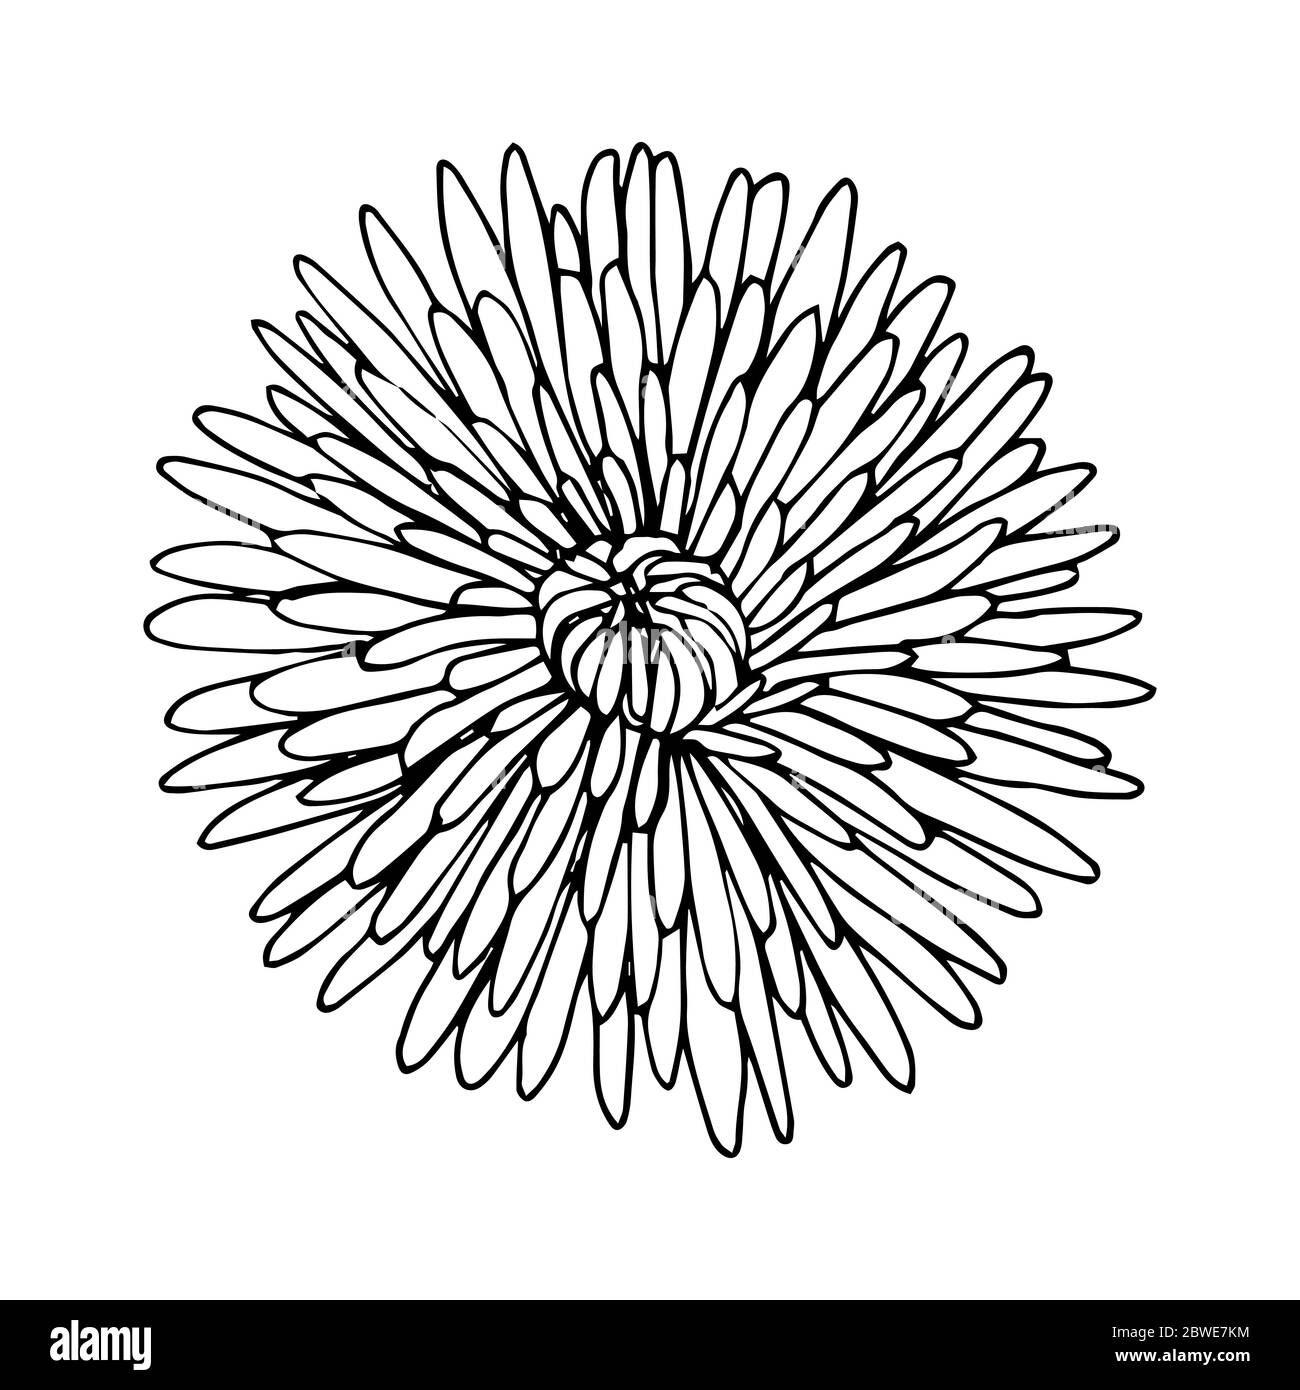 Chrysanthemum variety Anabel top view black outline isolated on white background, stock vector illustration for design and decor, prints, logo, sticke Stock Vector